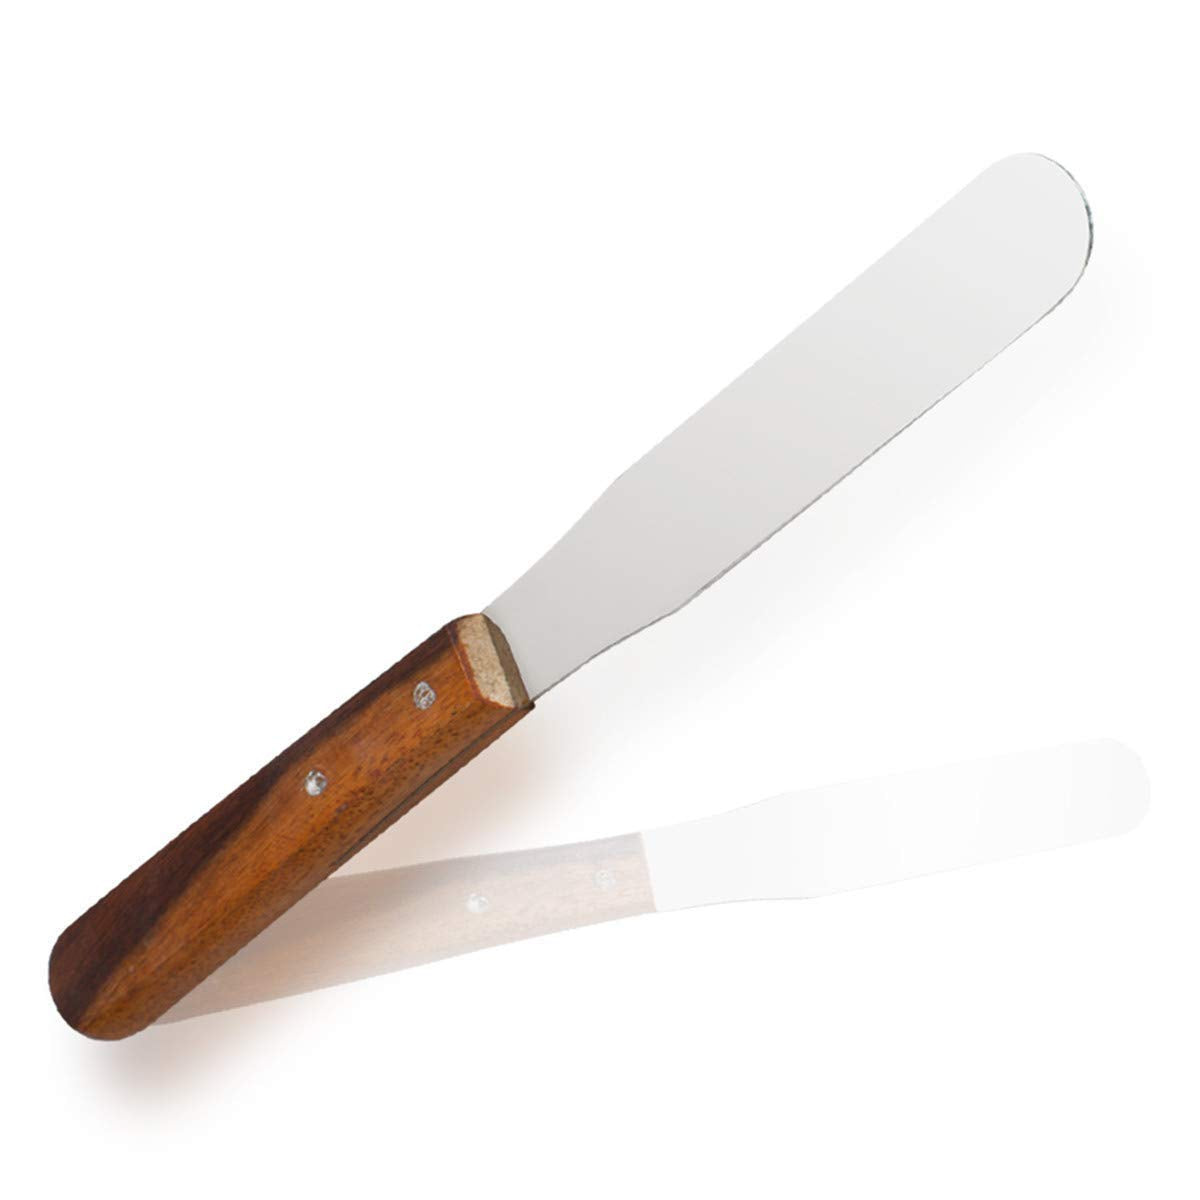 IMS-WHSPT5 Lab Spatula Wooden Handle, 5" Stainless Steel Blade, Brass Rivets